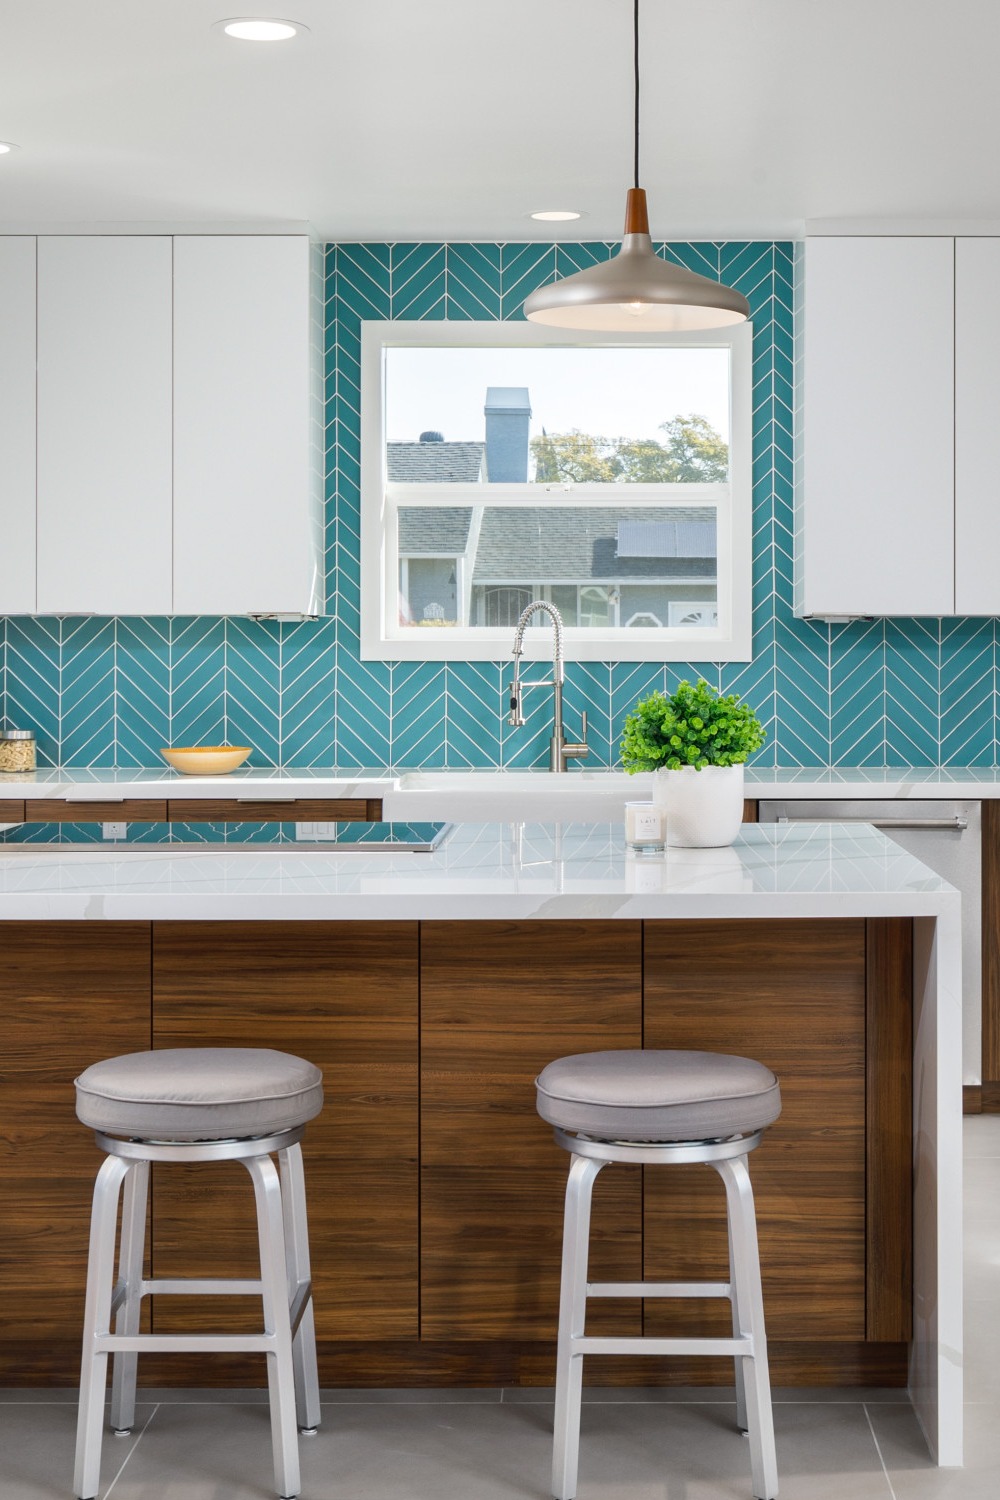 Blue Chevron Pattern Tile Backsplash White Cabinets Coastal Look Sign Brown Cabinets Bar Classic Grout Installation